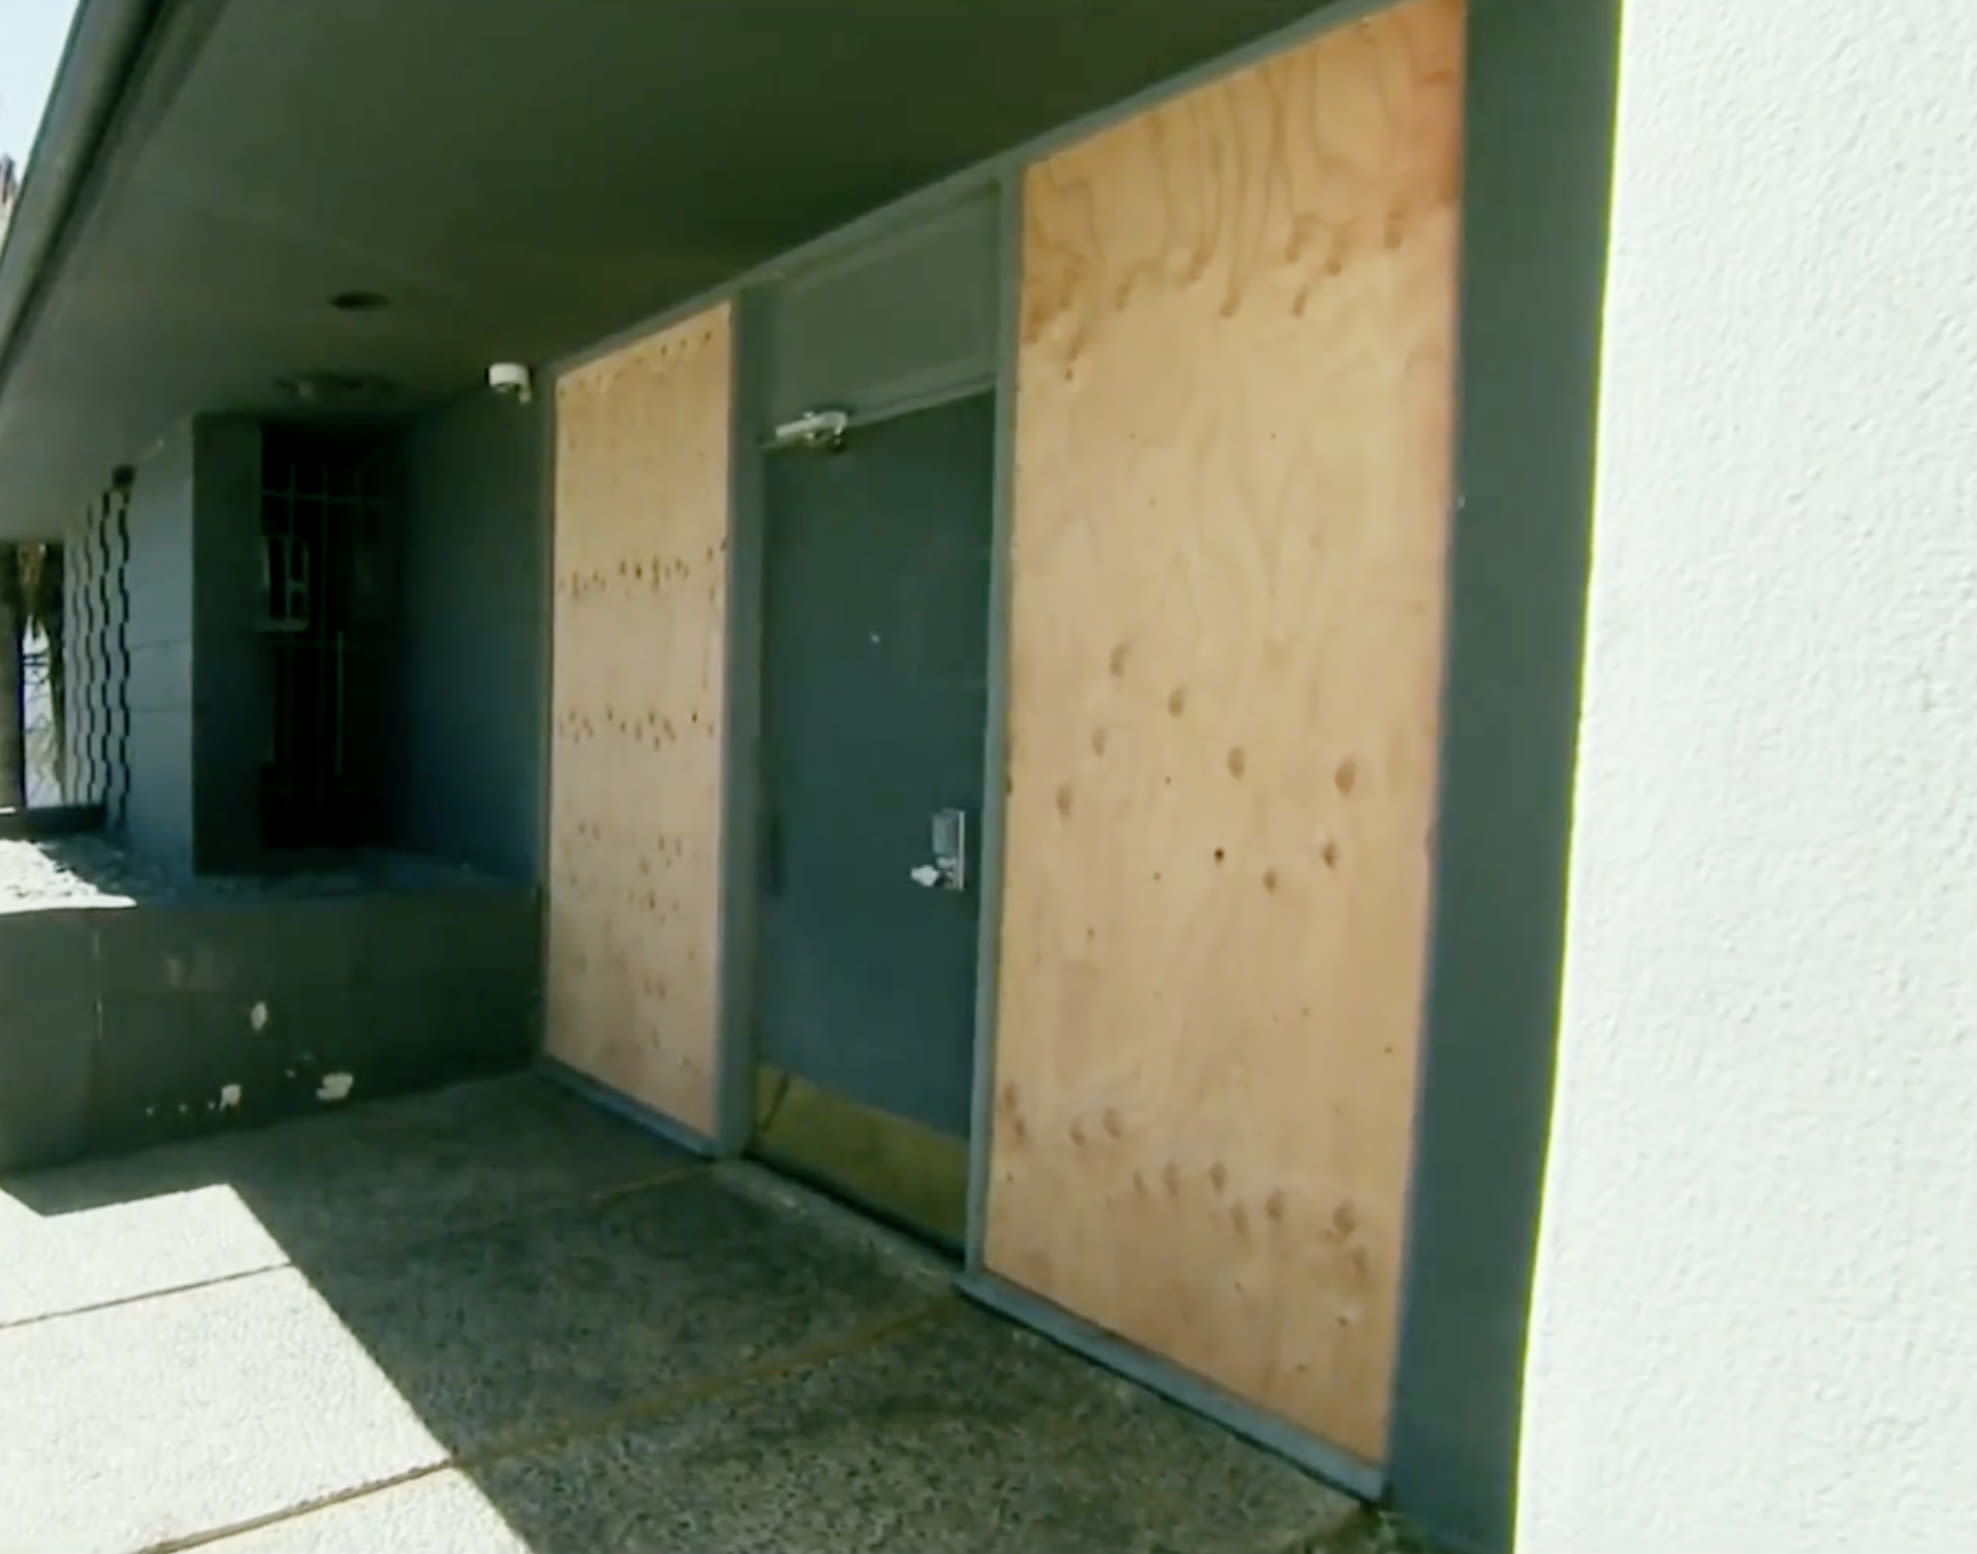 Man vandalizes Hollywood synagogue as accomplice records it, security video shows